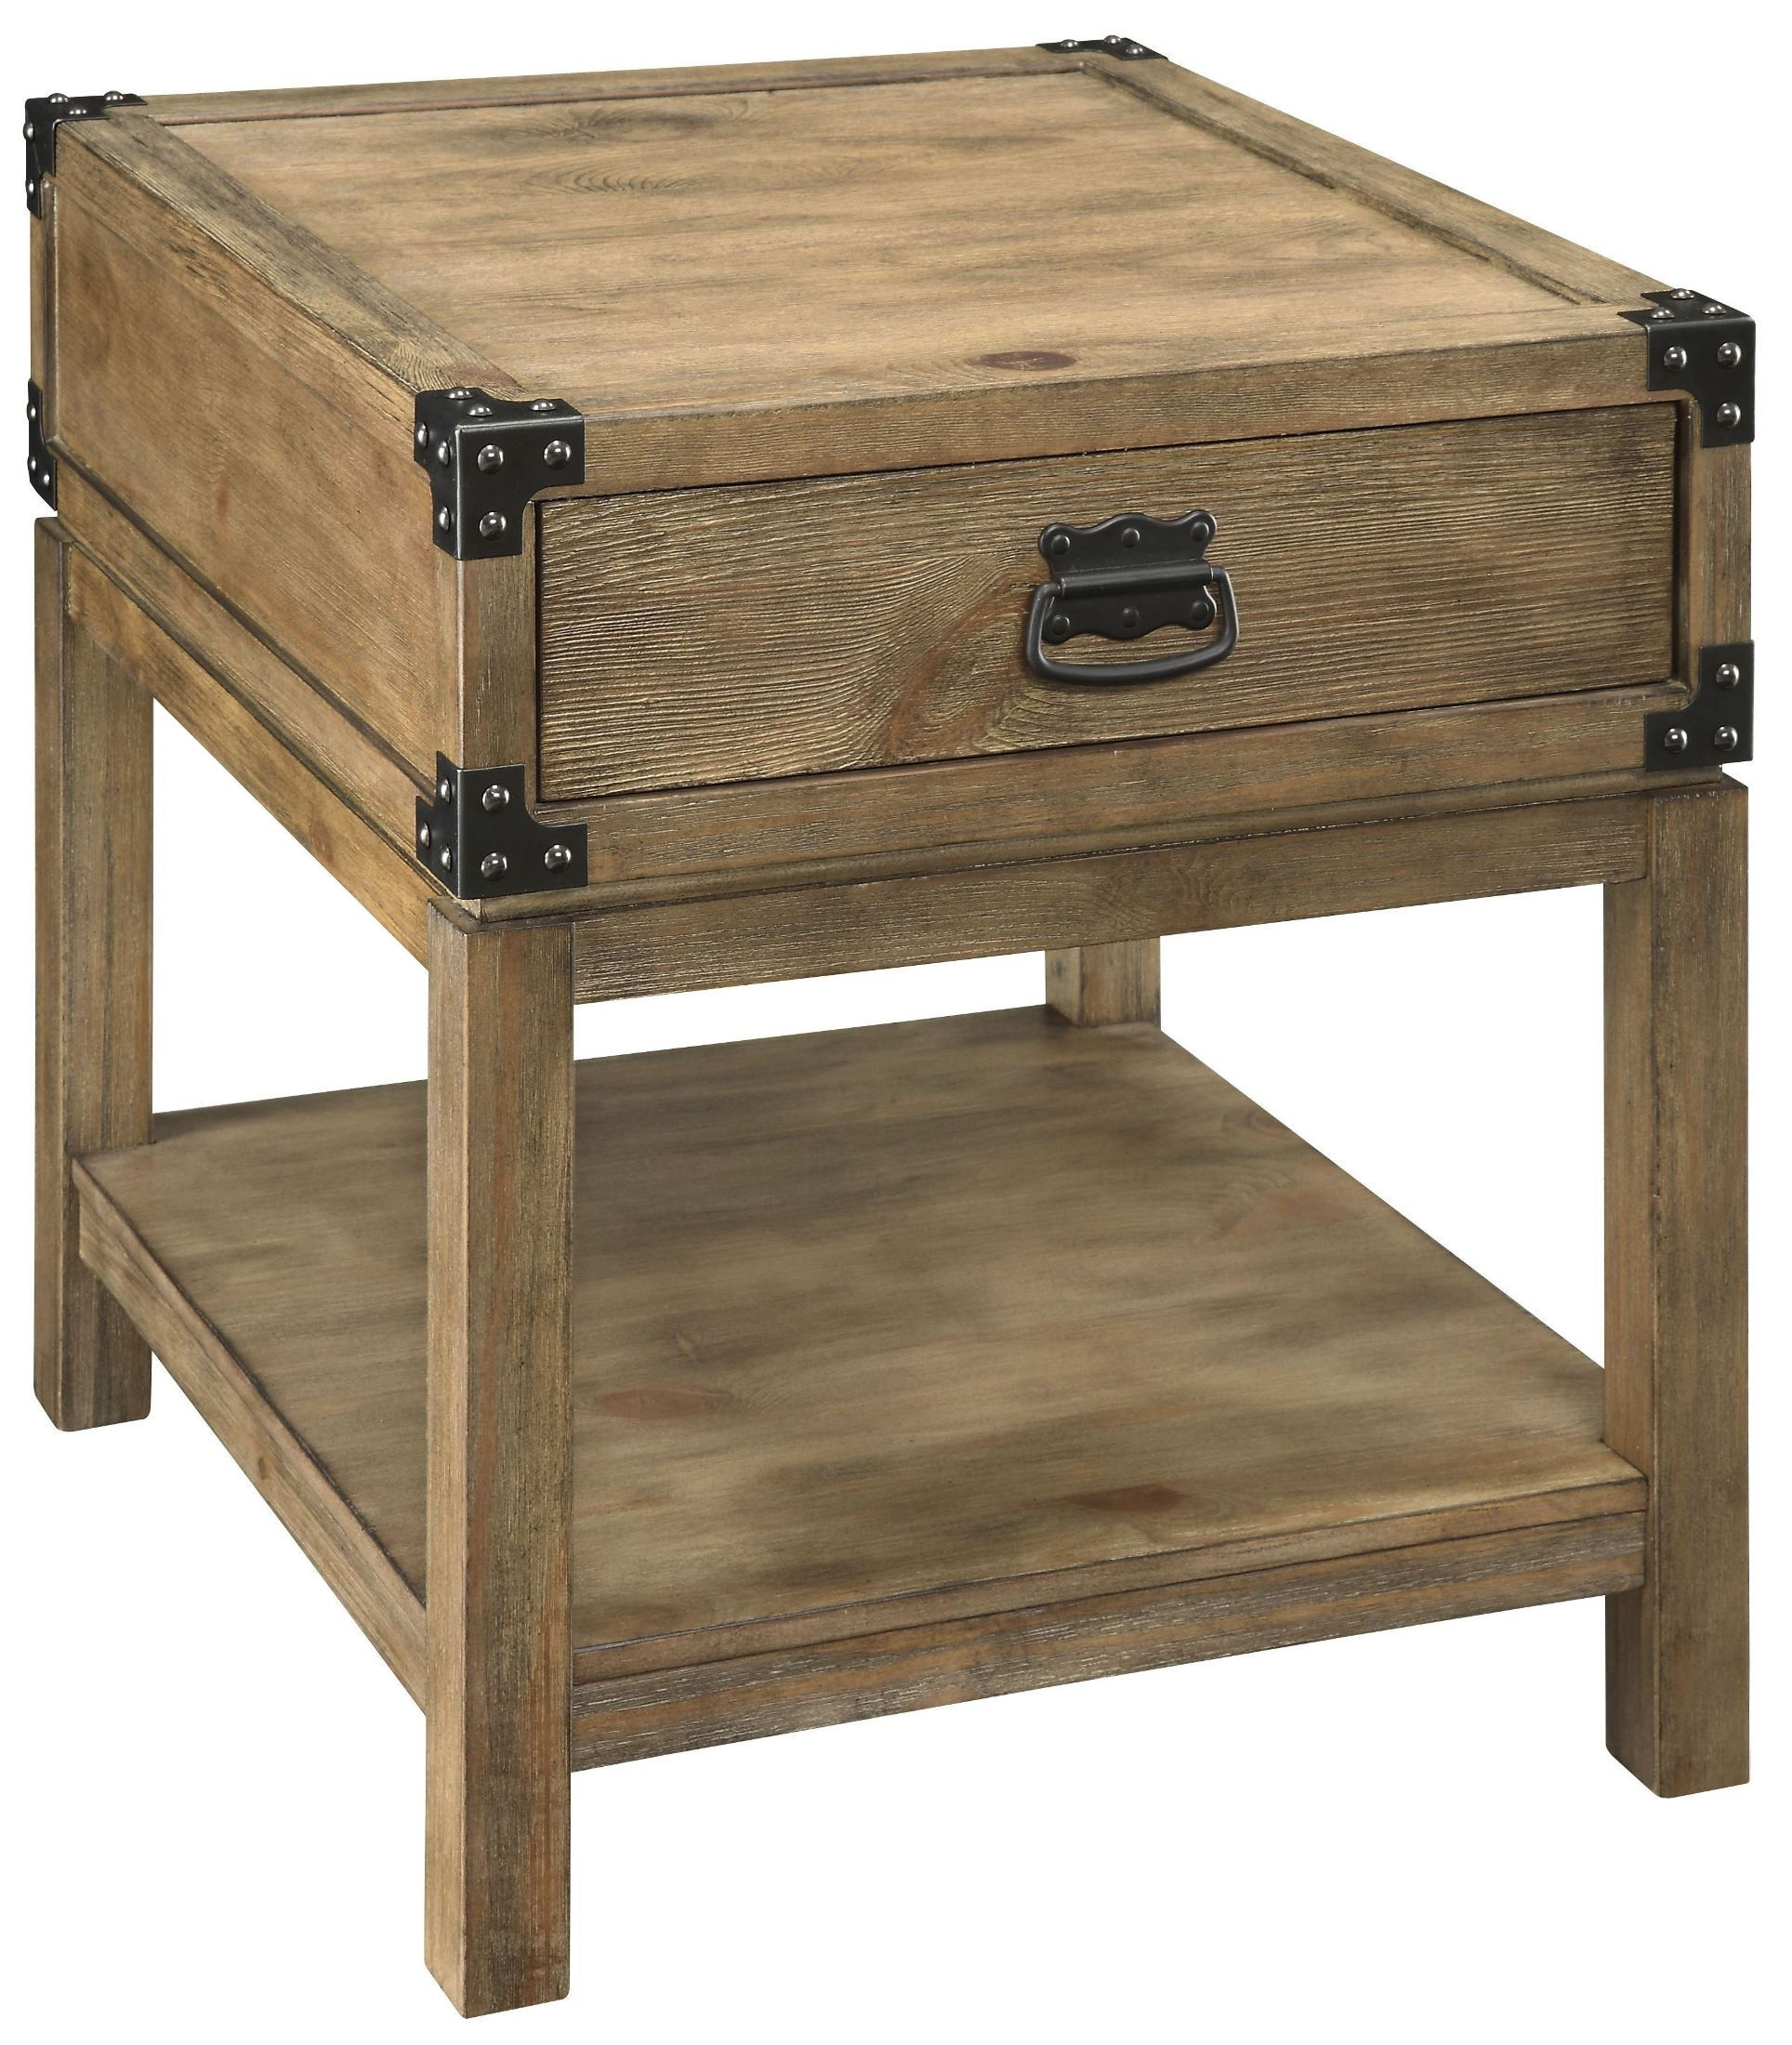 Living Room Chest Table
 Furniture Best Trunk End Tables For Living Room Furniture